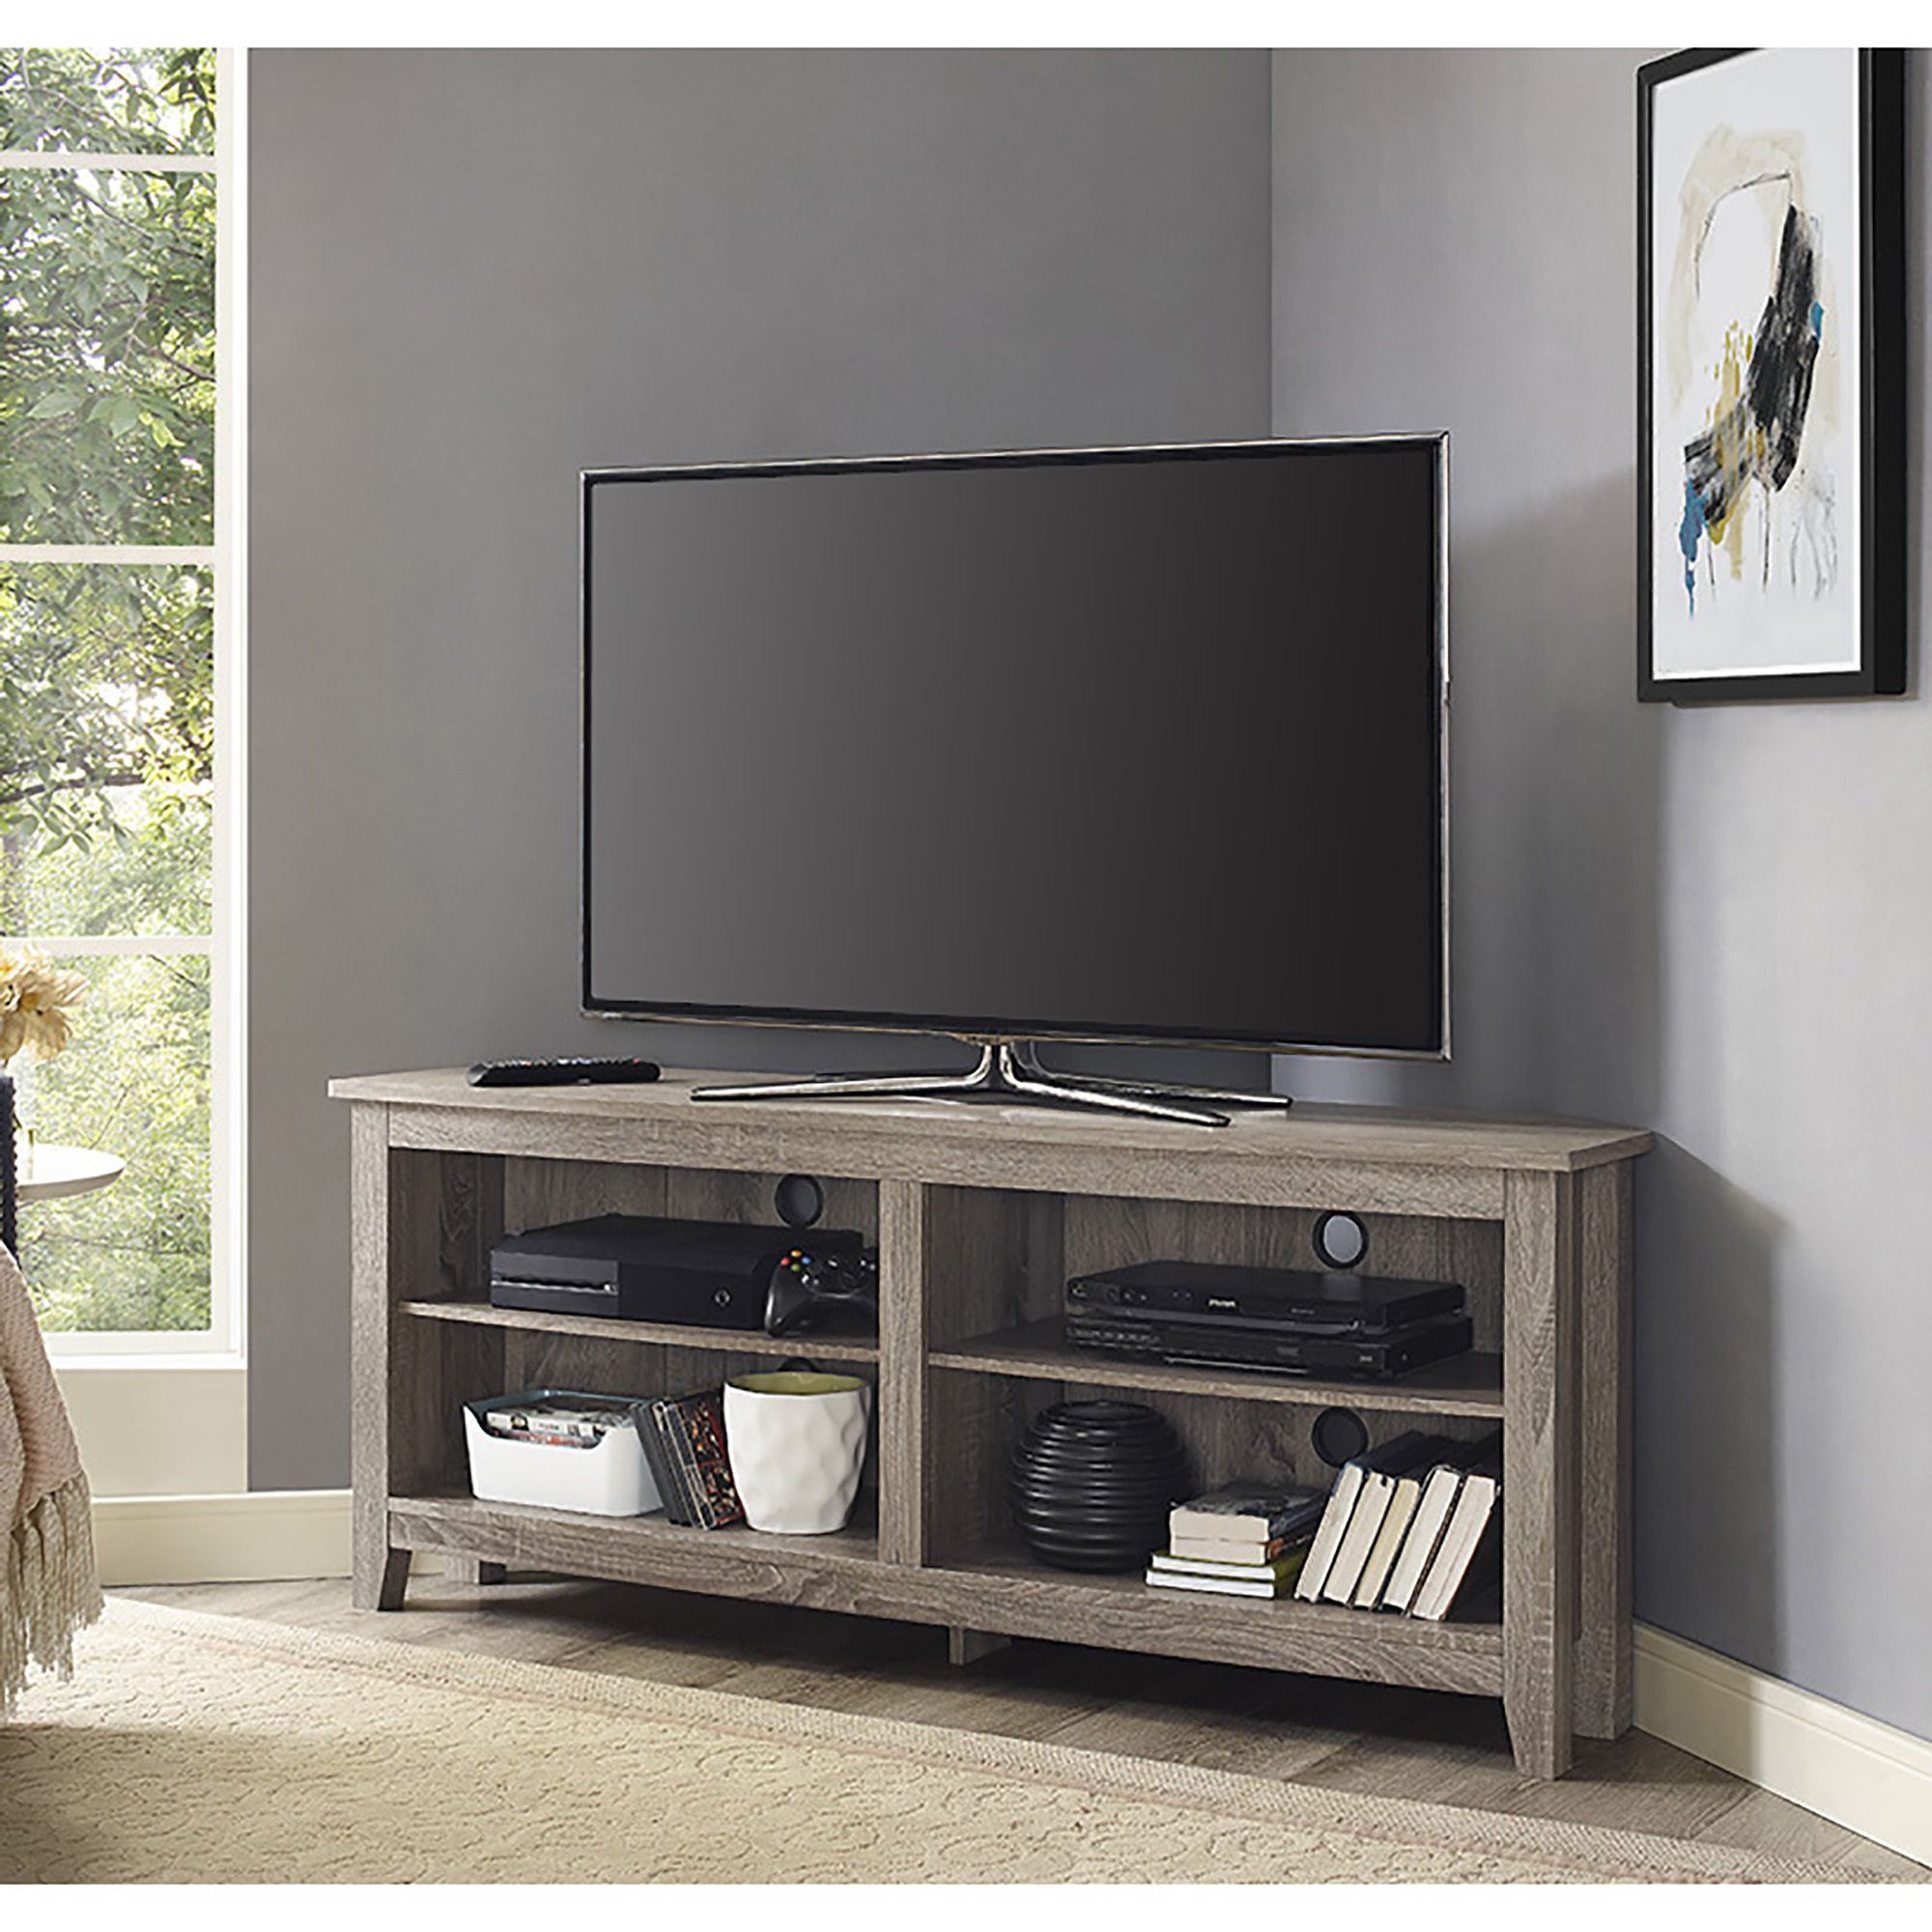 Havenside Home Jacksonville 58 Inch Driftwood (brown) Corner Tv Within Most Popular Small Corner Tv Stands (View 11 of 20)